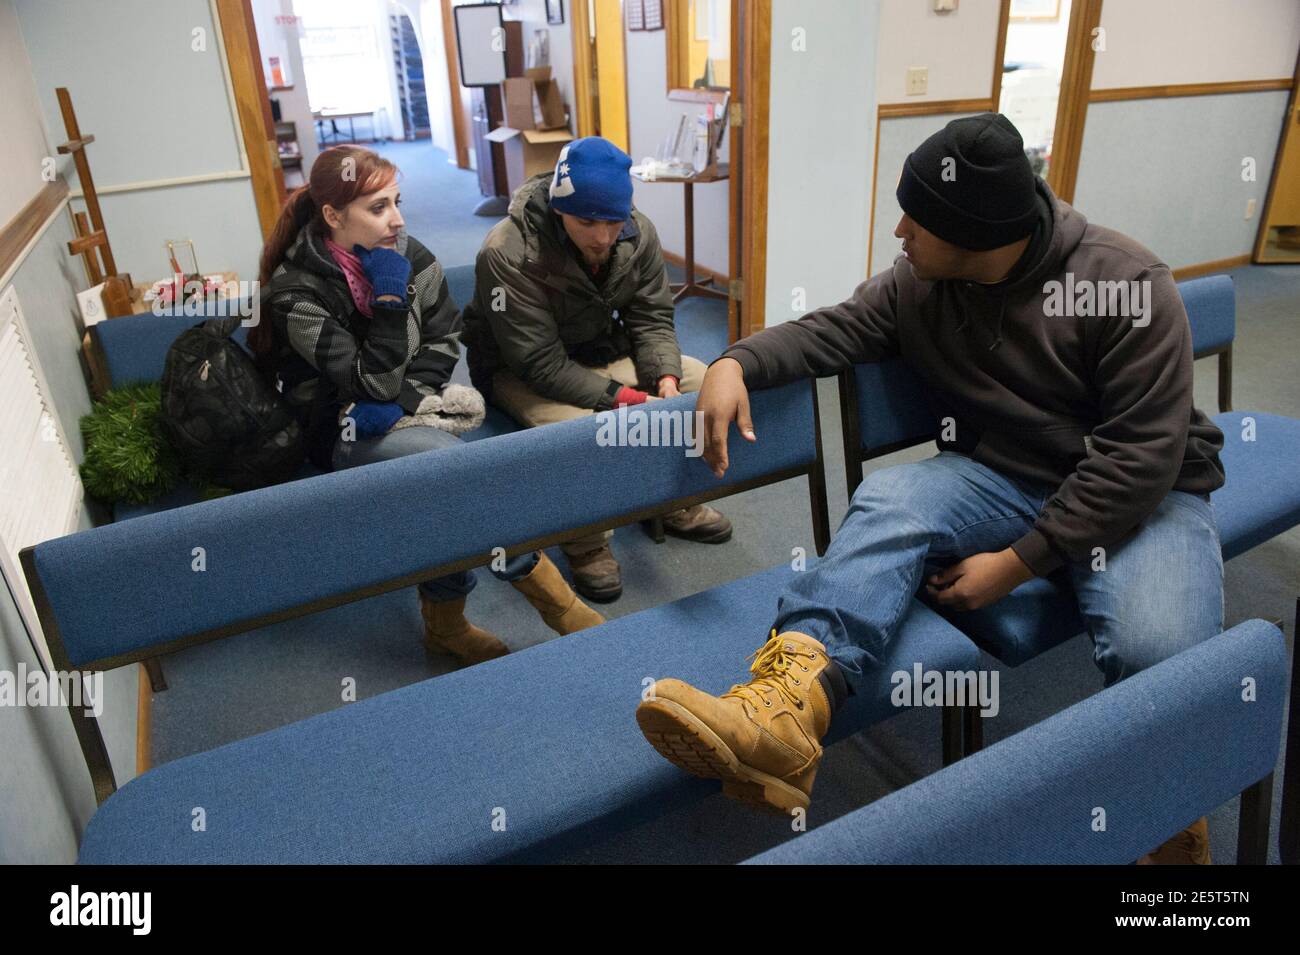 Terra Green (L), Jeff Williamson (C) and Bazileo Hernandez wait to talk to a social worker in hopes of getting help finding a place to stay for the night at the Salvation Army office in Williston, North Dakota on January 13, 2015. Like so many before them, Terra Green, Jeff Williamson and Bazileo Hernandez came to North Dakota's oil country seeking a better life. They just came too late. Itinerant, unskilled workers could as recently as last spring show up in the No. 2 U.S. oil producing state and vie for salaries north of $100,000 per year with guaranteed housing. The steep drop in oil prices Stock Photo